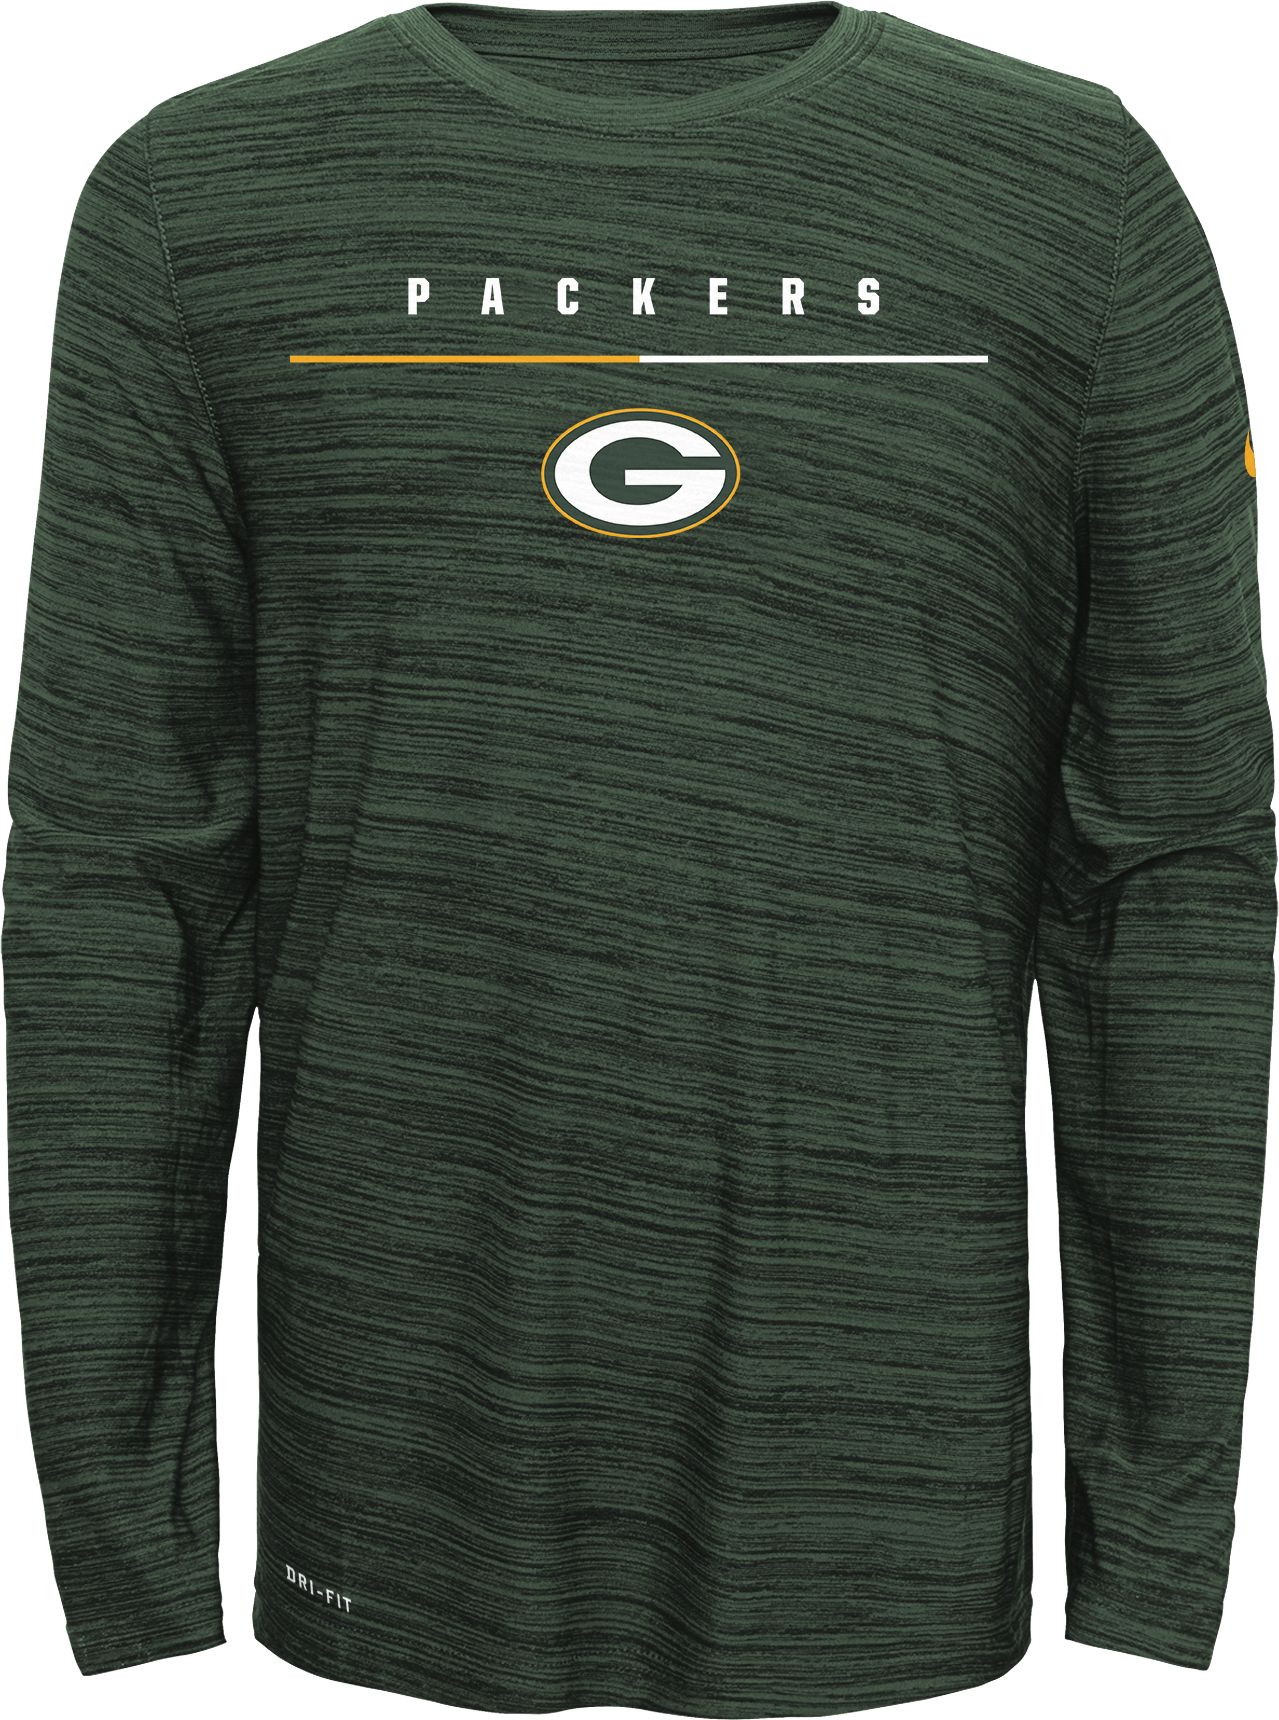 grey packers jersey